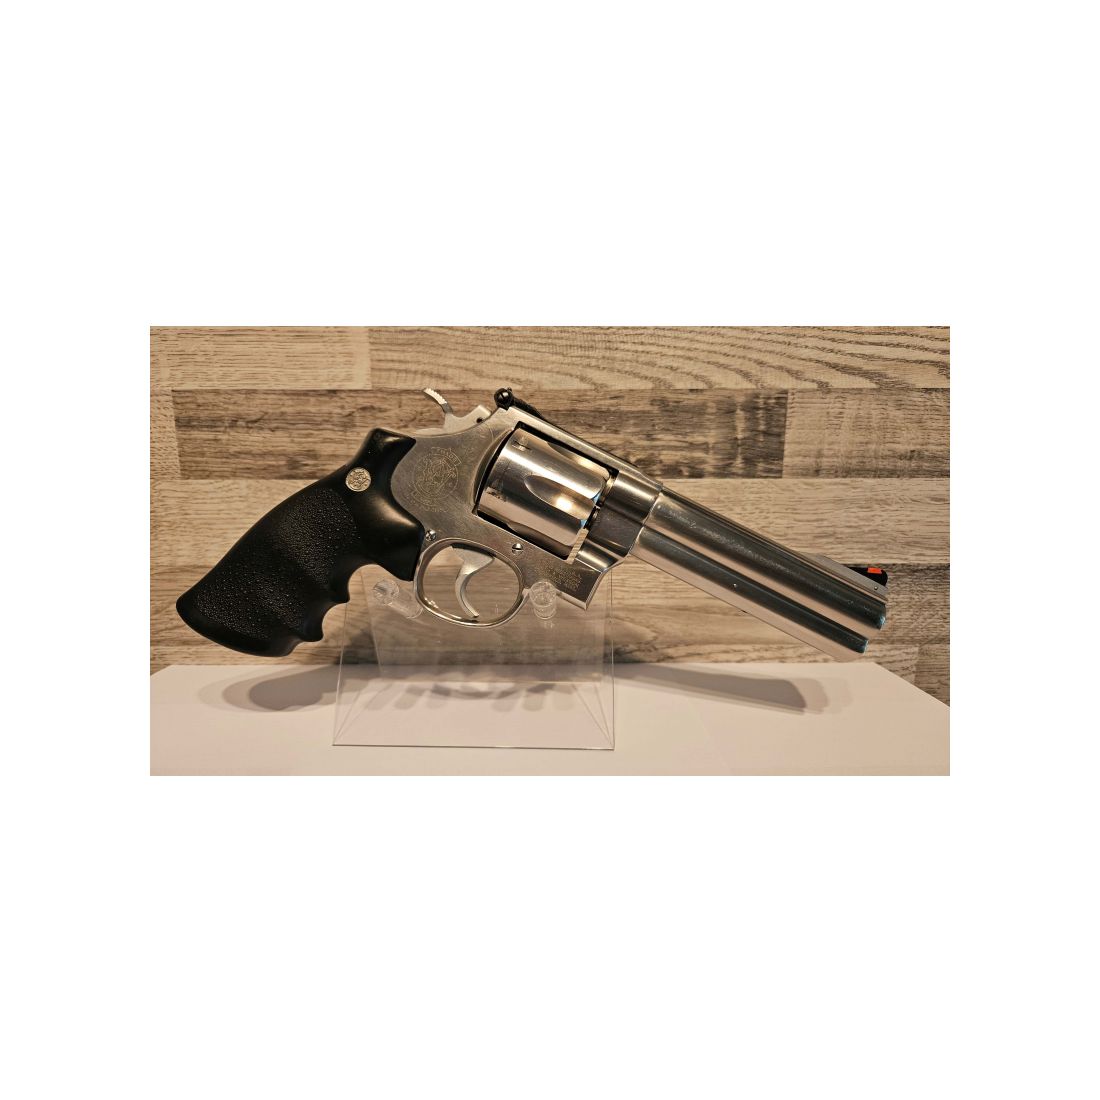 Vom Fachhandel - Revolver Smith & Wesson Mod. 629-3 Classic 5" Kal. .44Magnum Stainless Steel